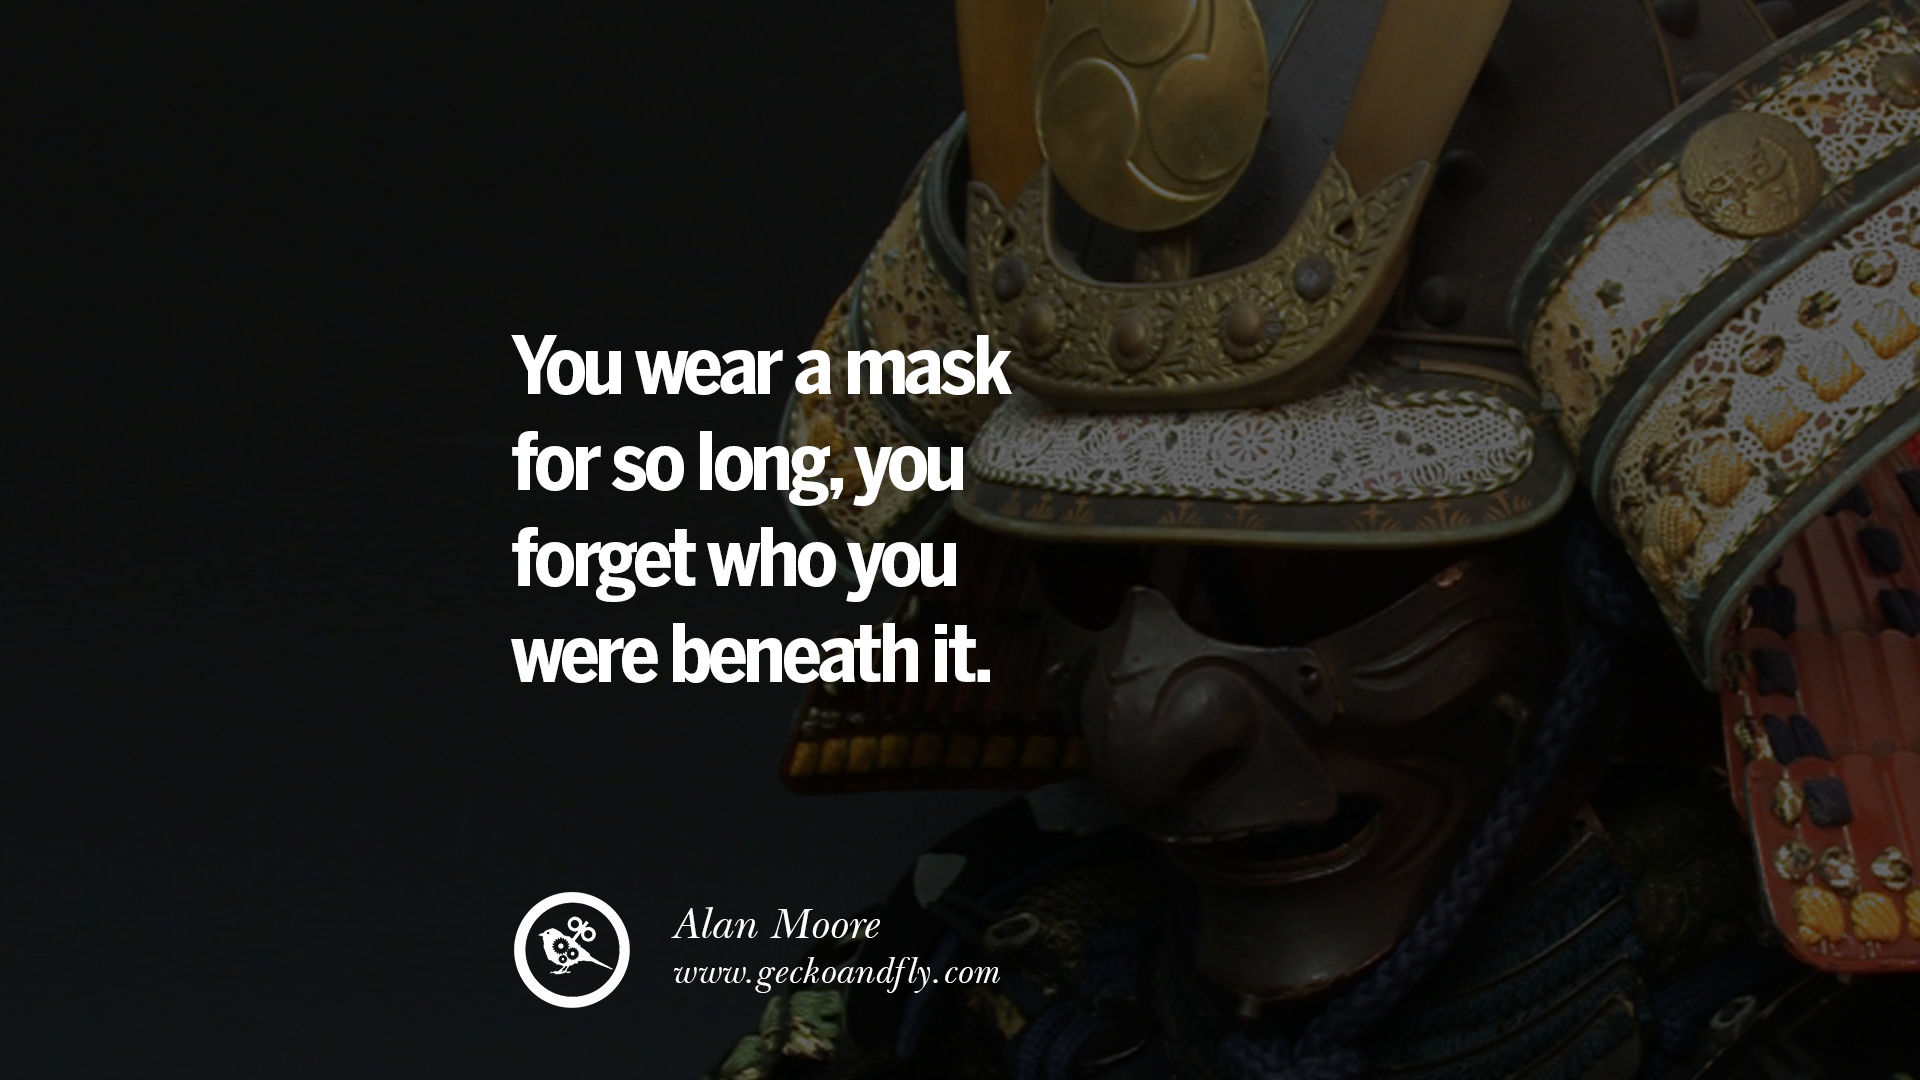 mask quotes wearing wear masks hiding forget were beneath removing know oneself should truth lying alan moore wears emotions geckoandfly